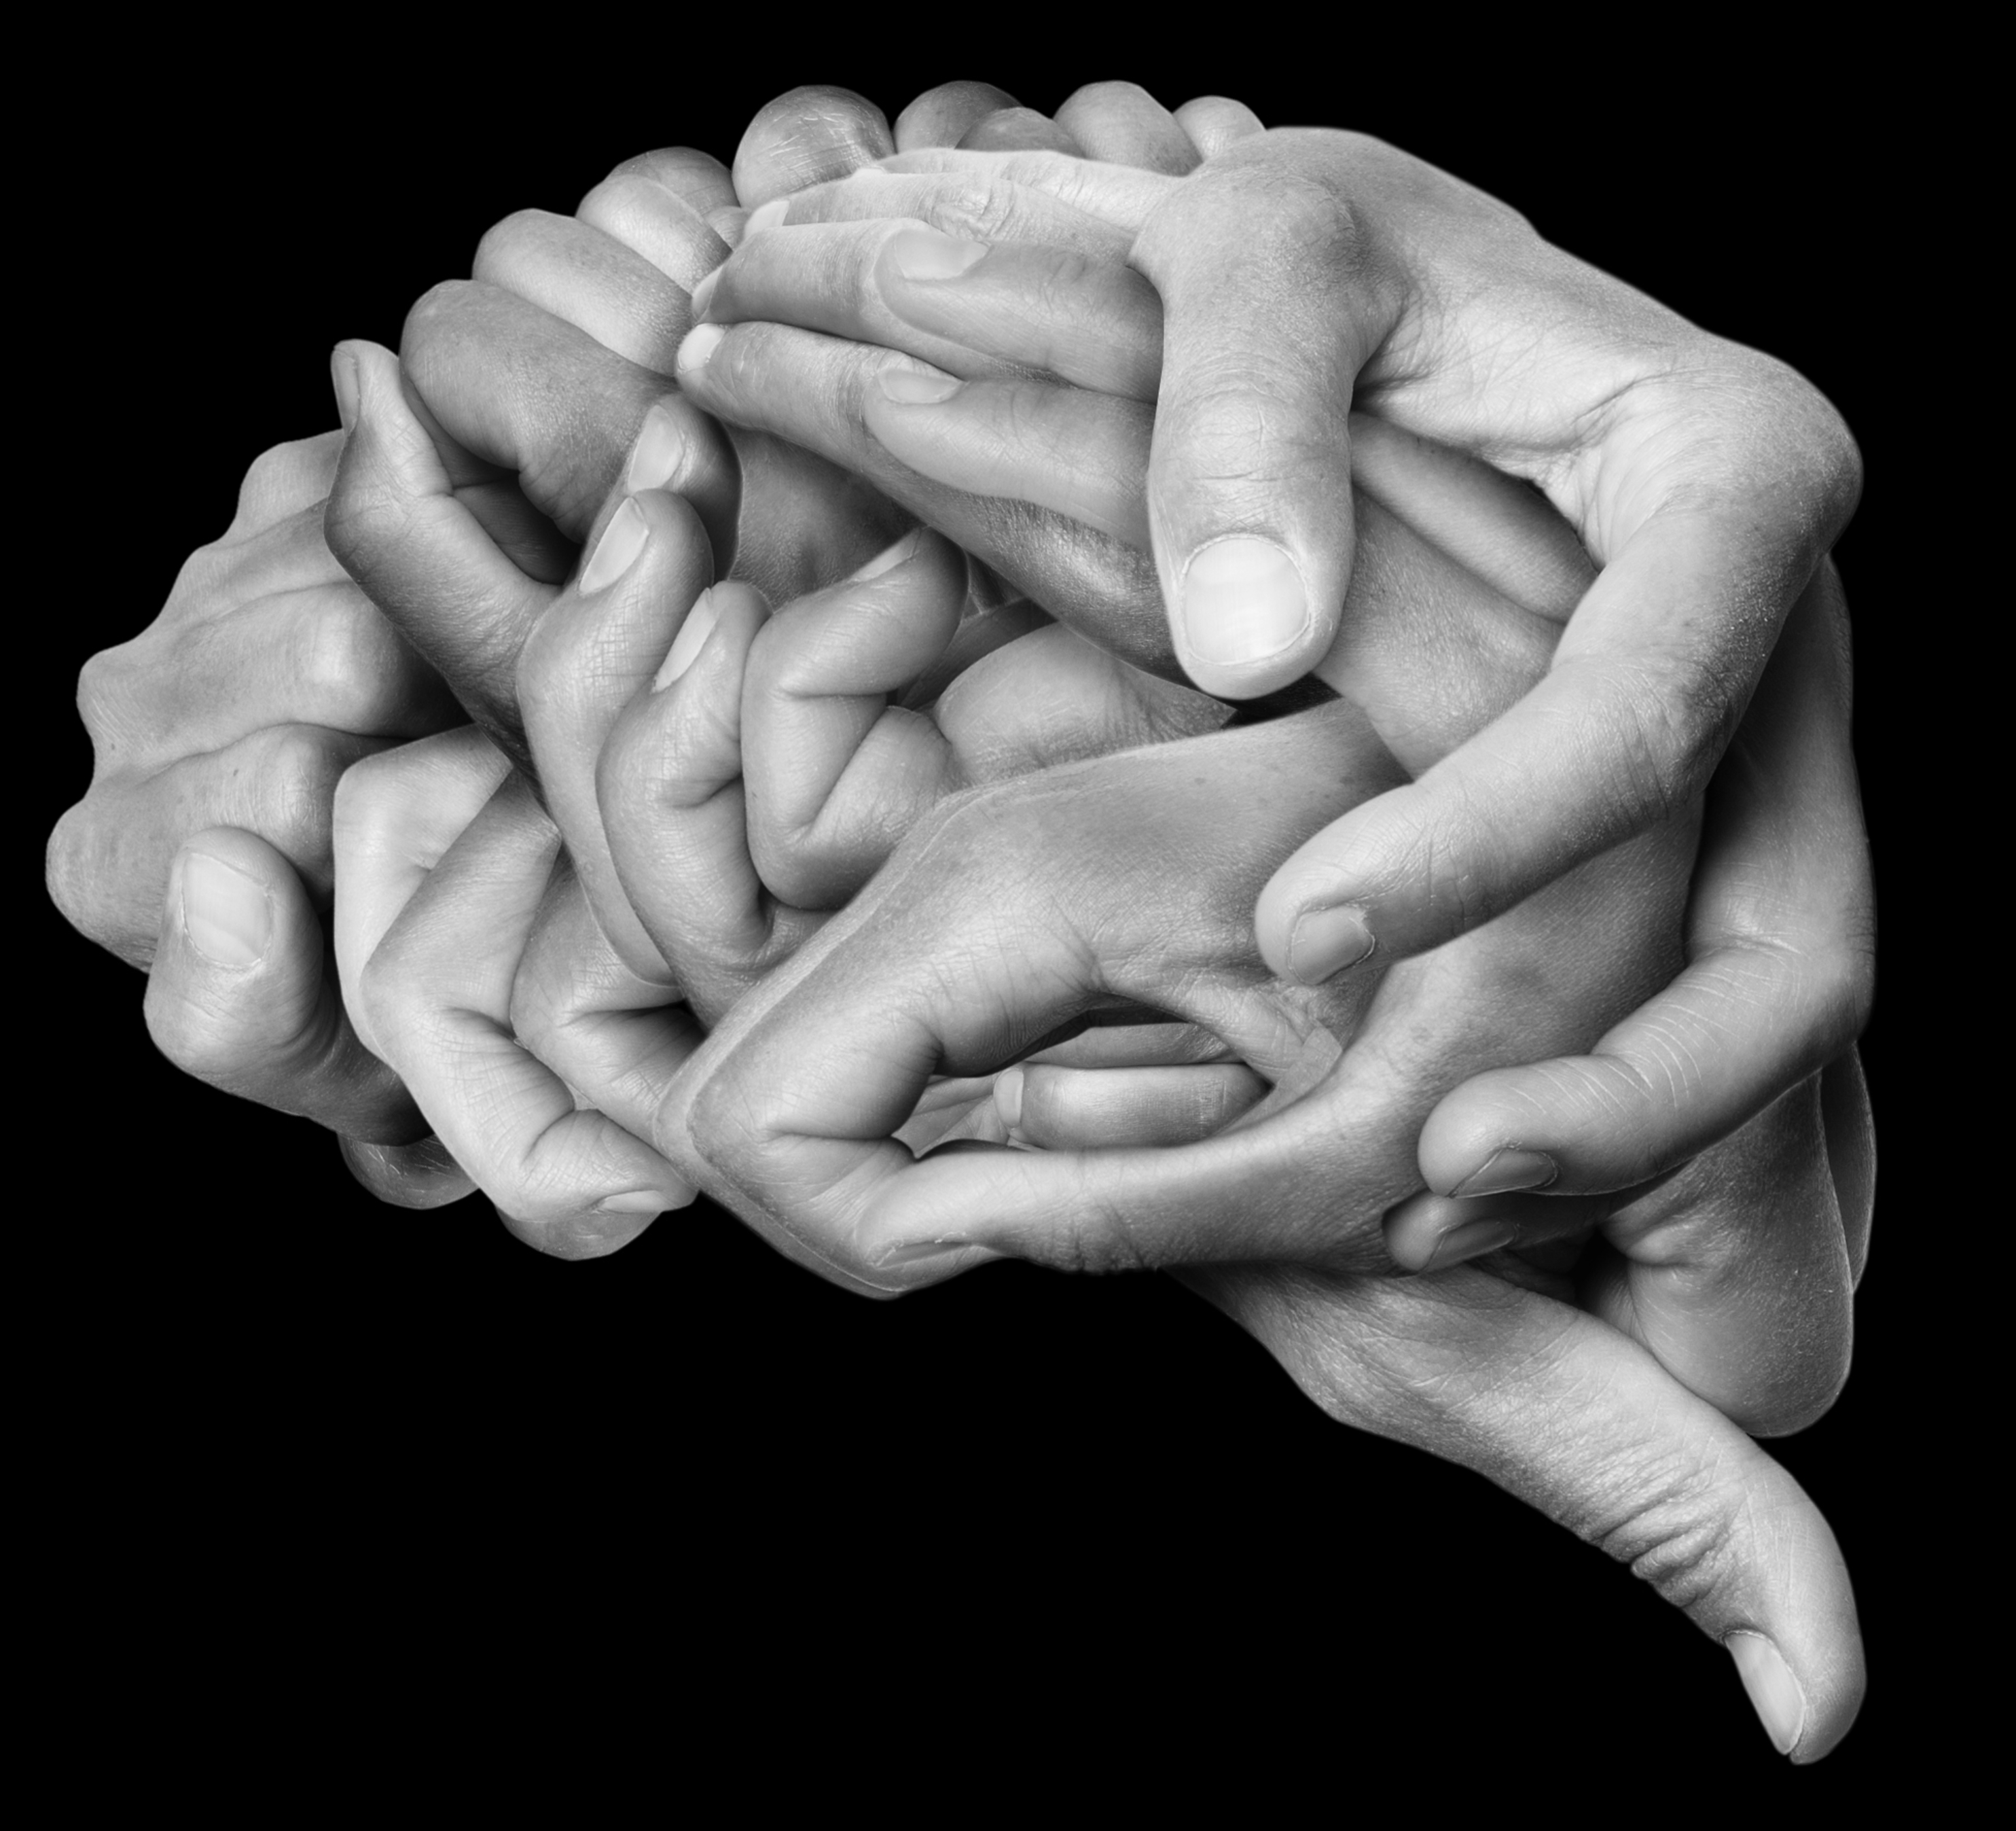 Likeness of a human brain created by hands